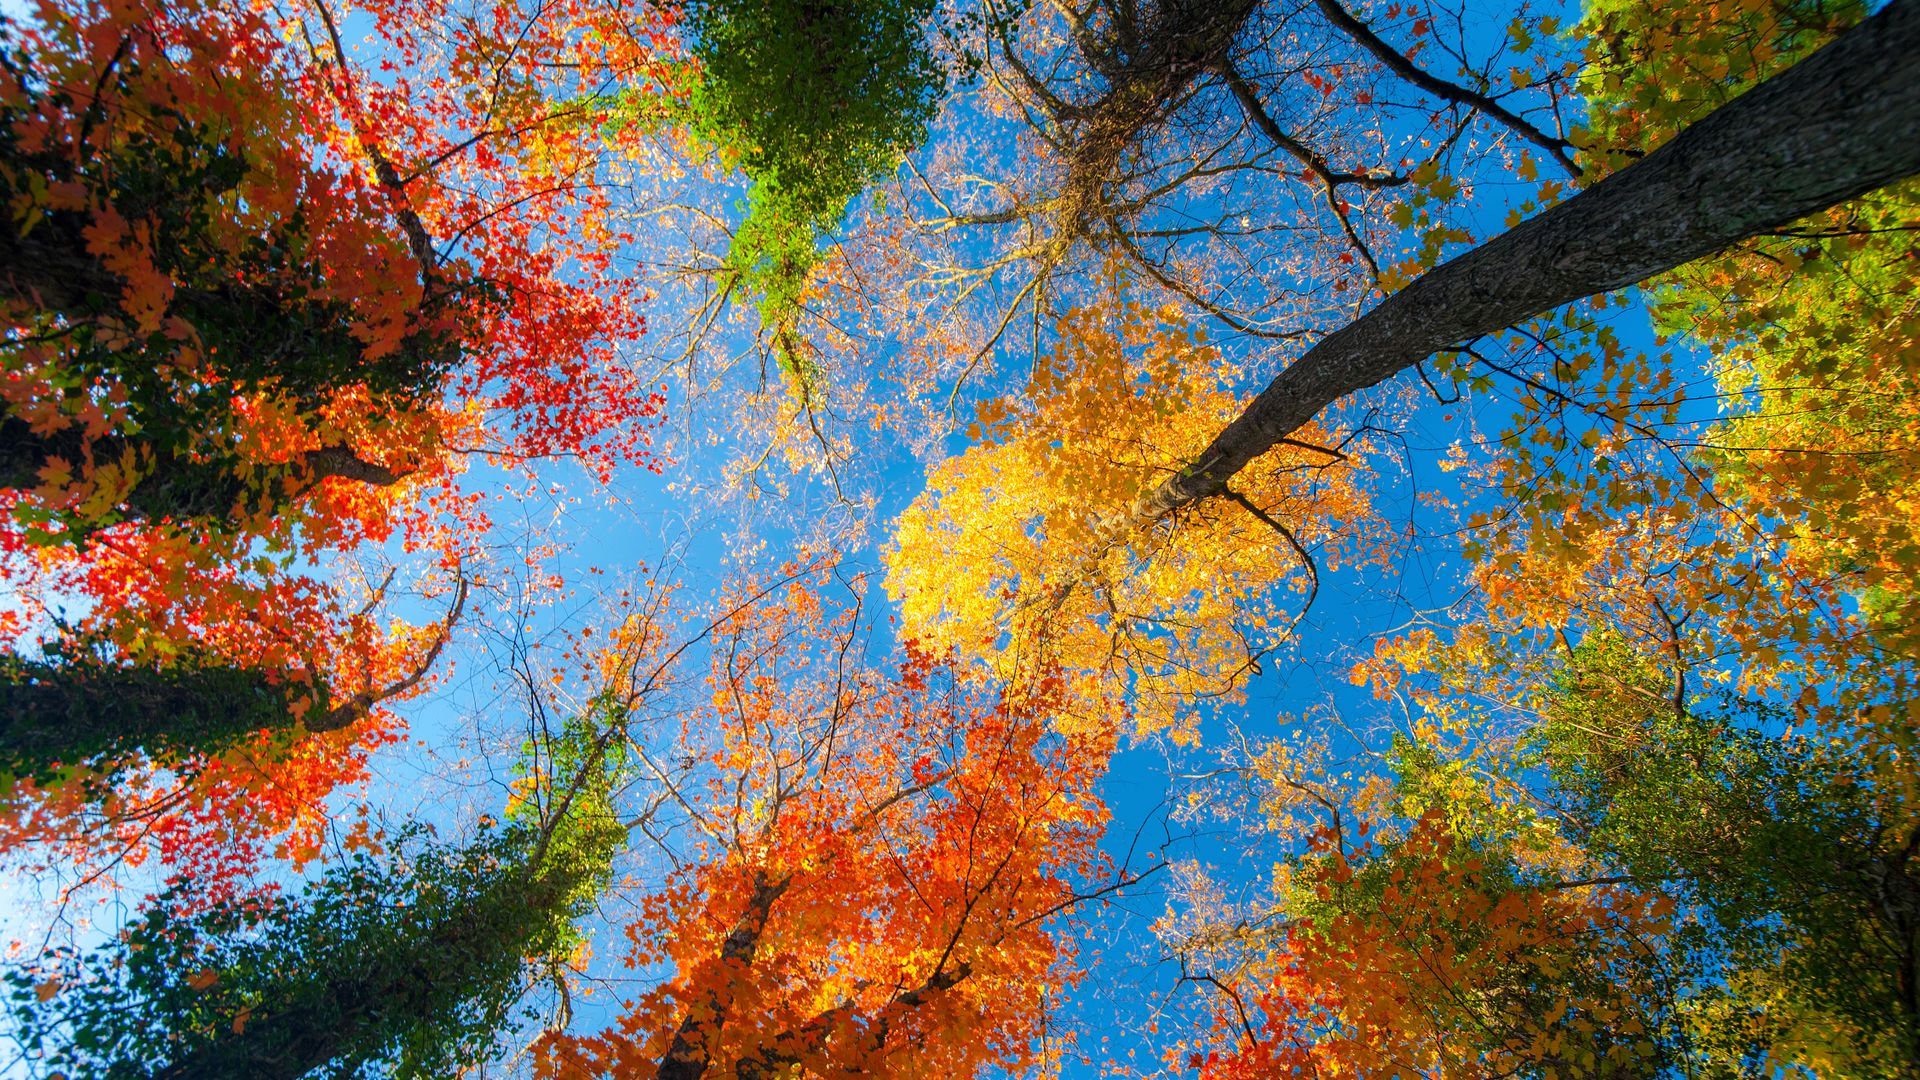 Autumn Trees And Sky View Free HD Image